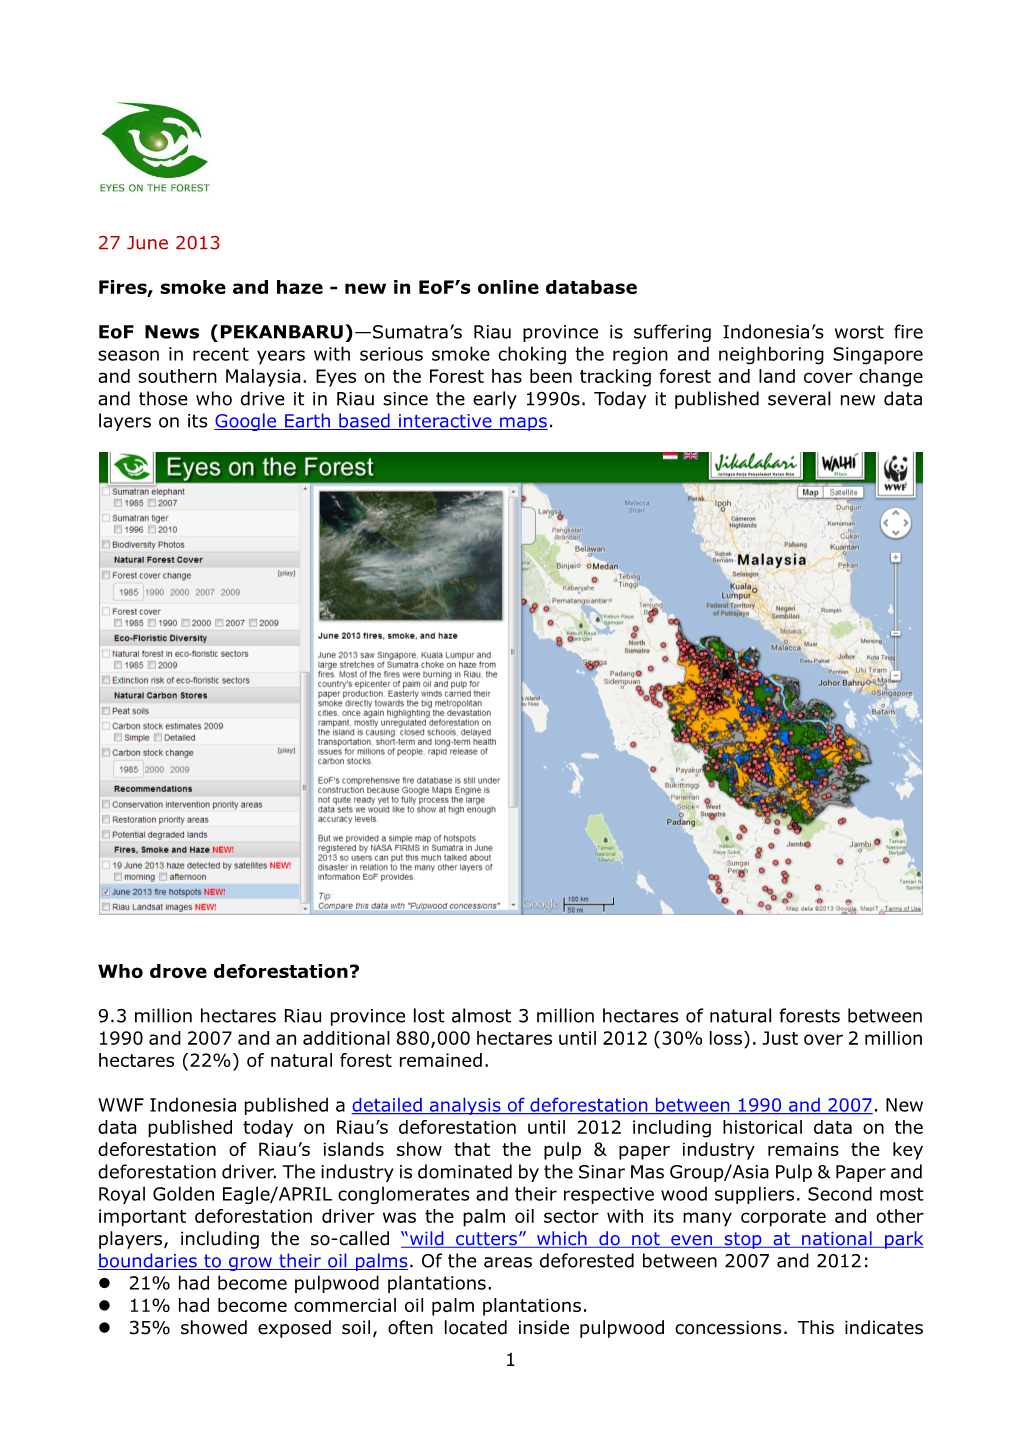 Fires, Smoke and Haze - New in Eof’S Online Database